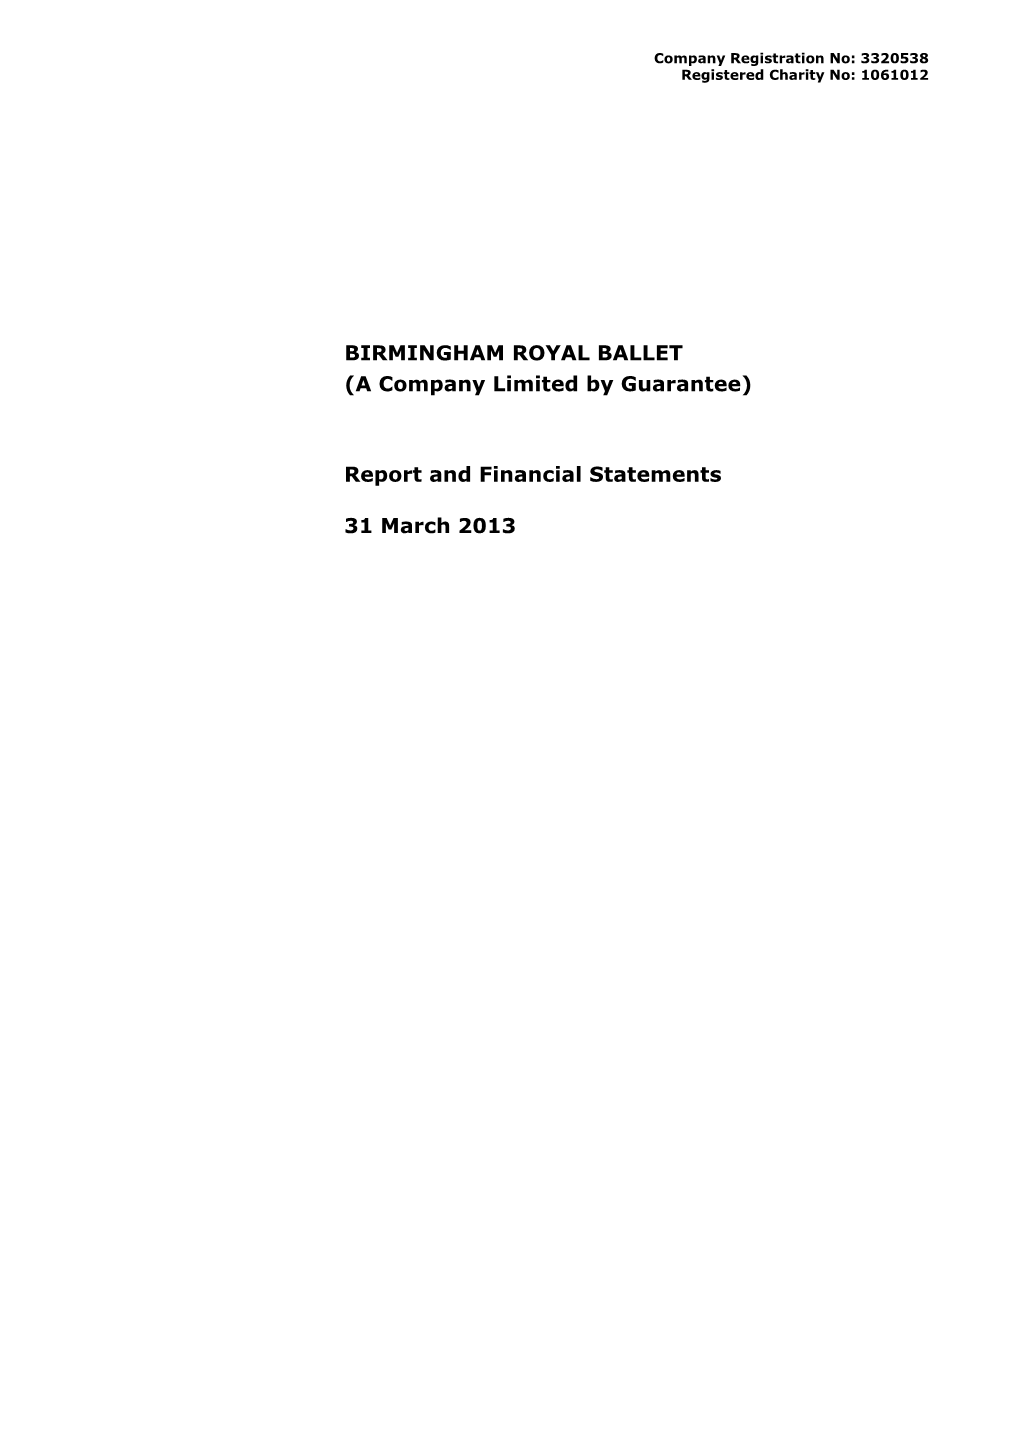 Report and Financial Statements 31 March